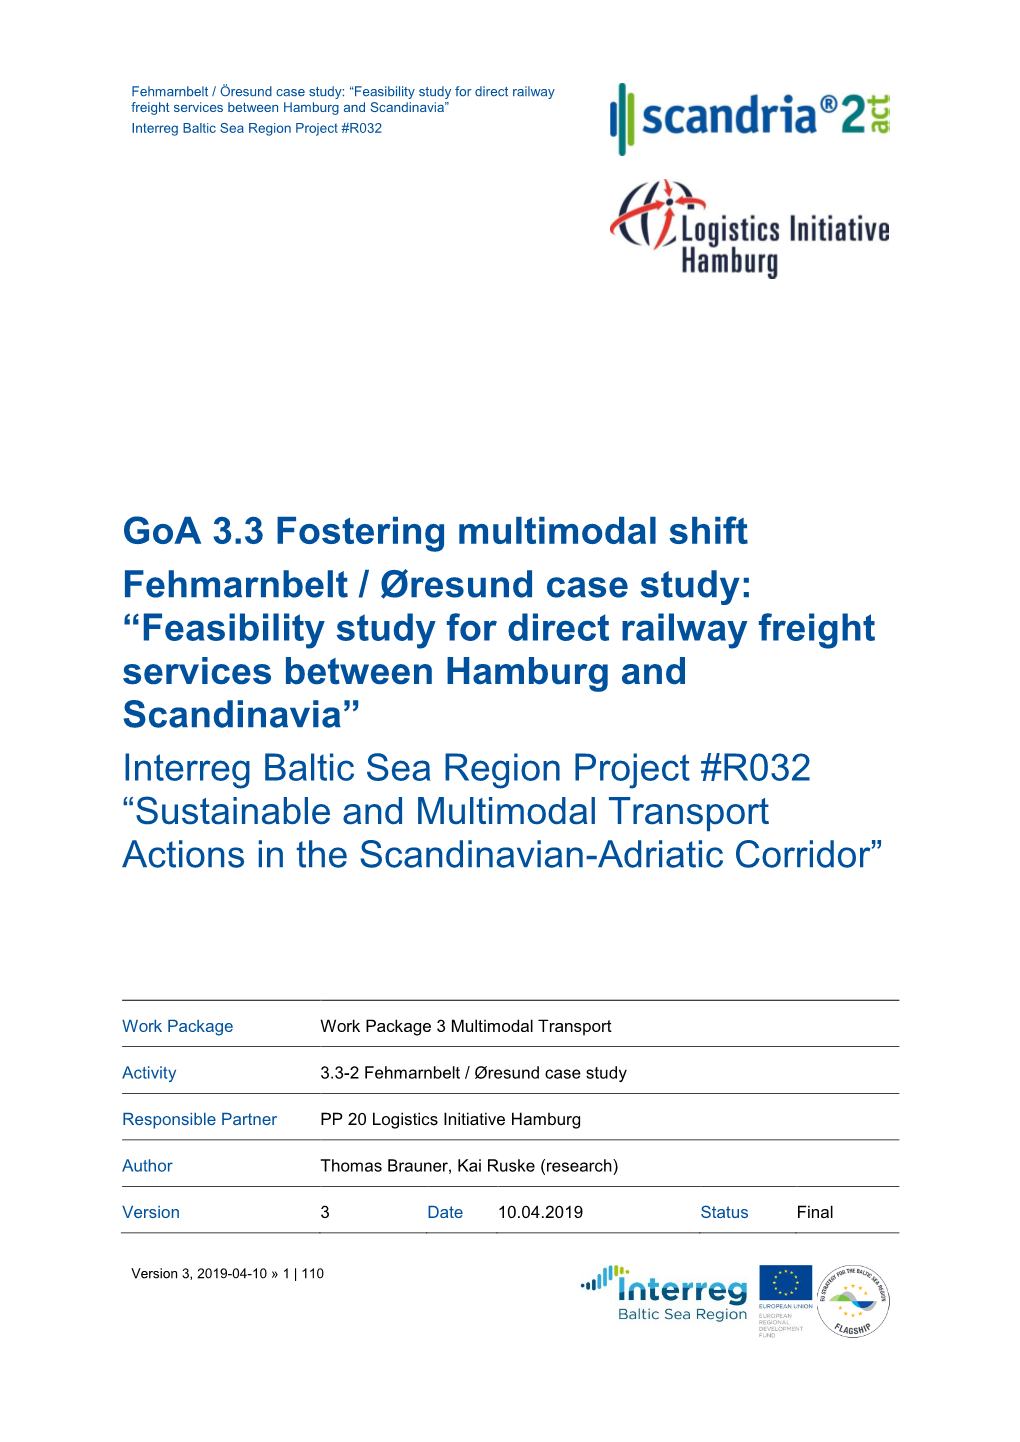 Feasibility Study for Direct Railway Freight Services Between Hamburg and Scandinavia” Interreg Baltic Sea Region Project #R032